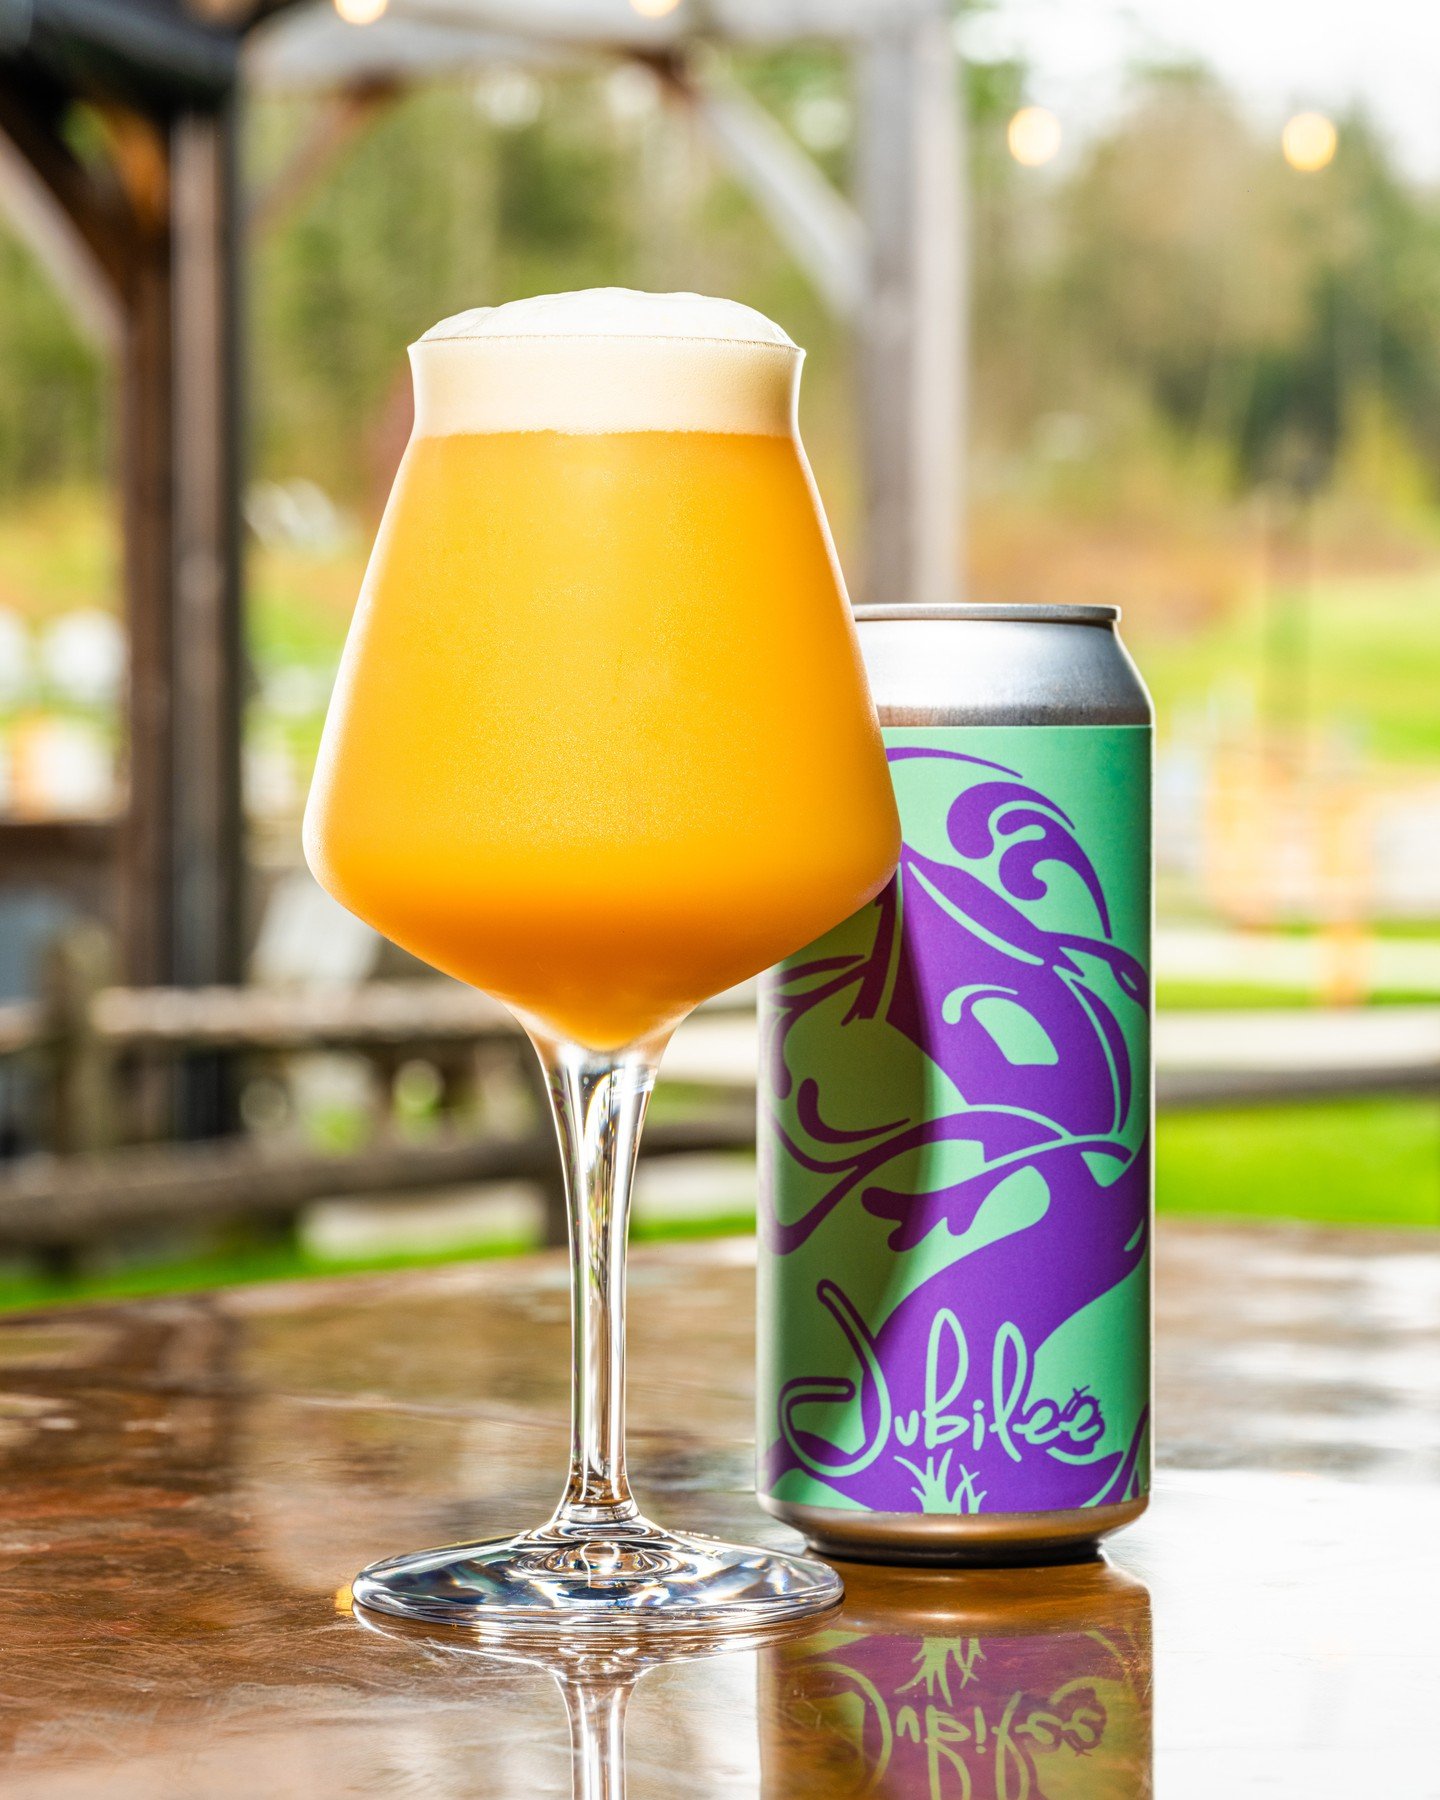 Every once in a while, a hop comes along that speaks to us in a way that few others do. 

Peacharine, from New Zealand, is one of those hops. Featuring incredible stone fruit notes layered throughout the experience, Jubilee showcases this delightful 